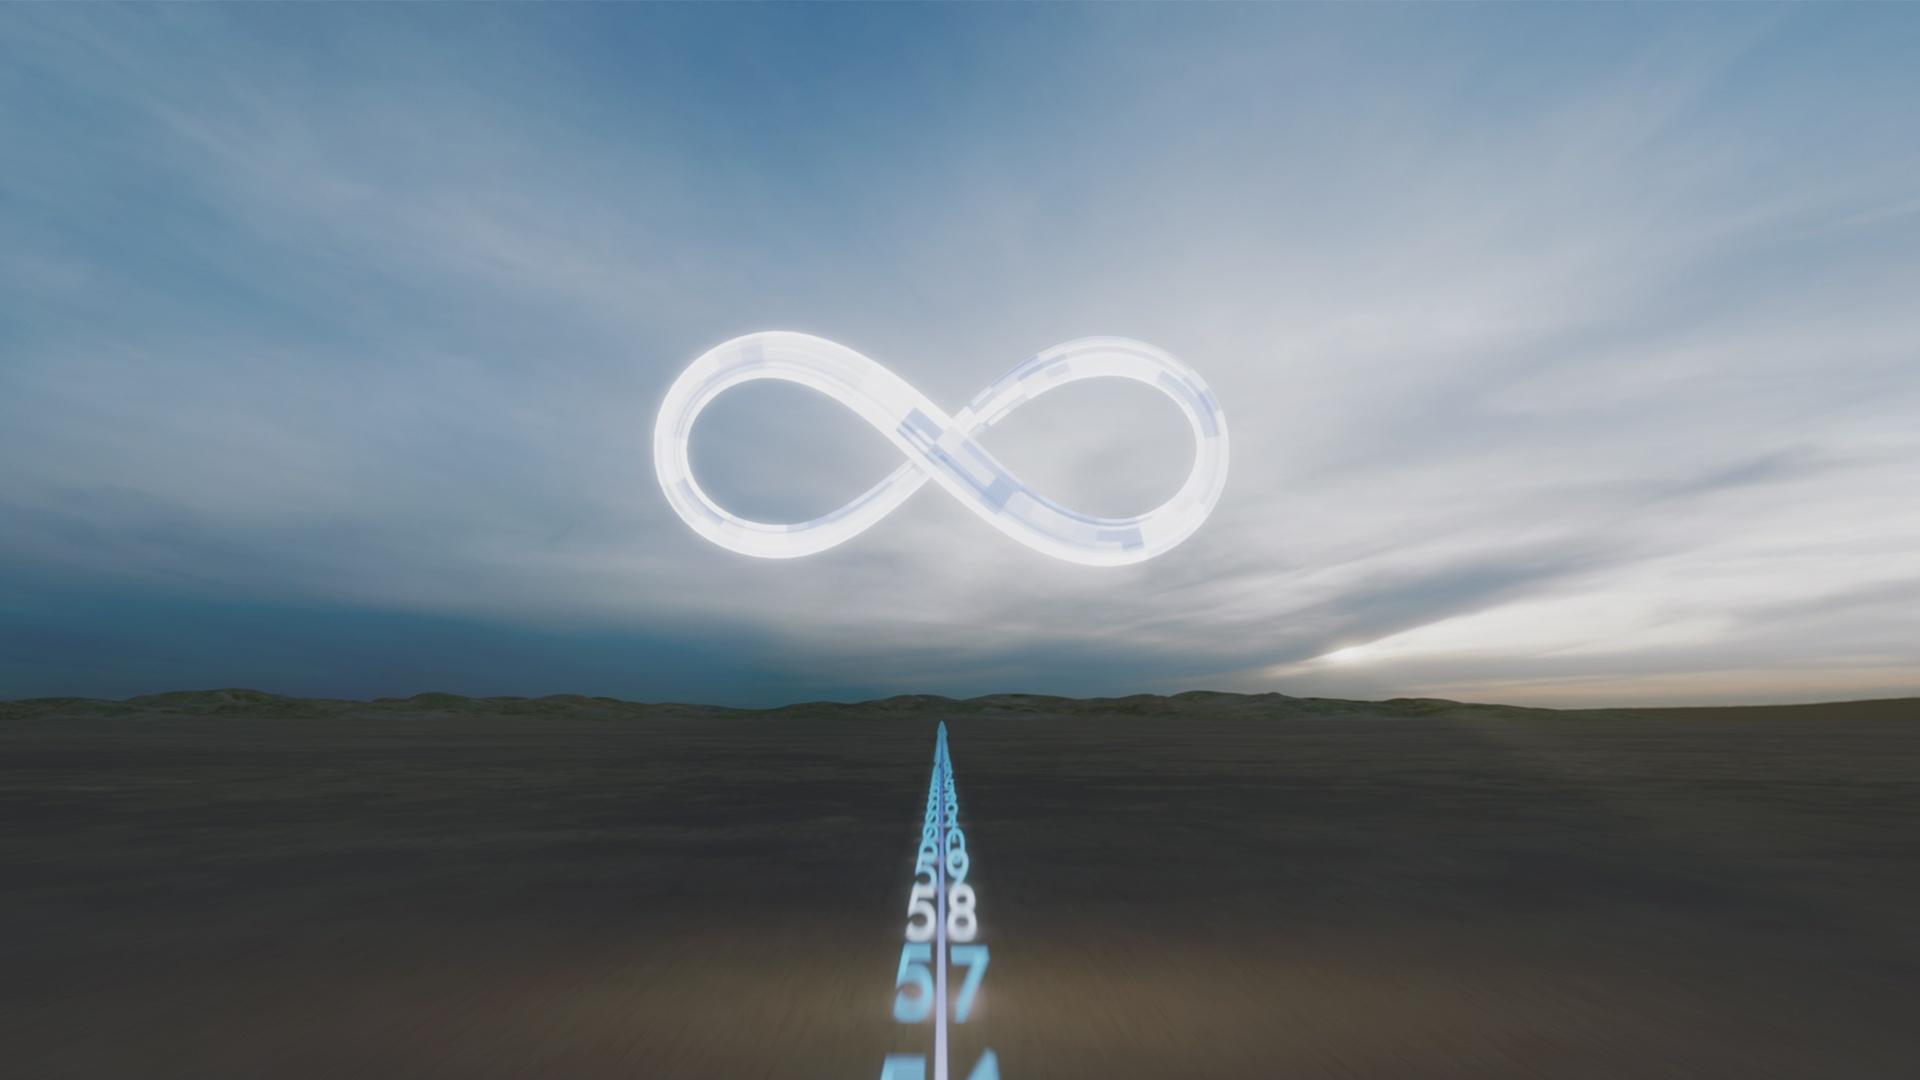 500 Infinity Pictures HD  Download Free Images on Unsplash